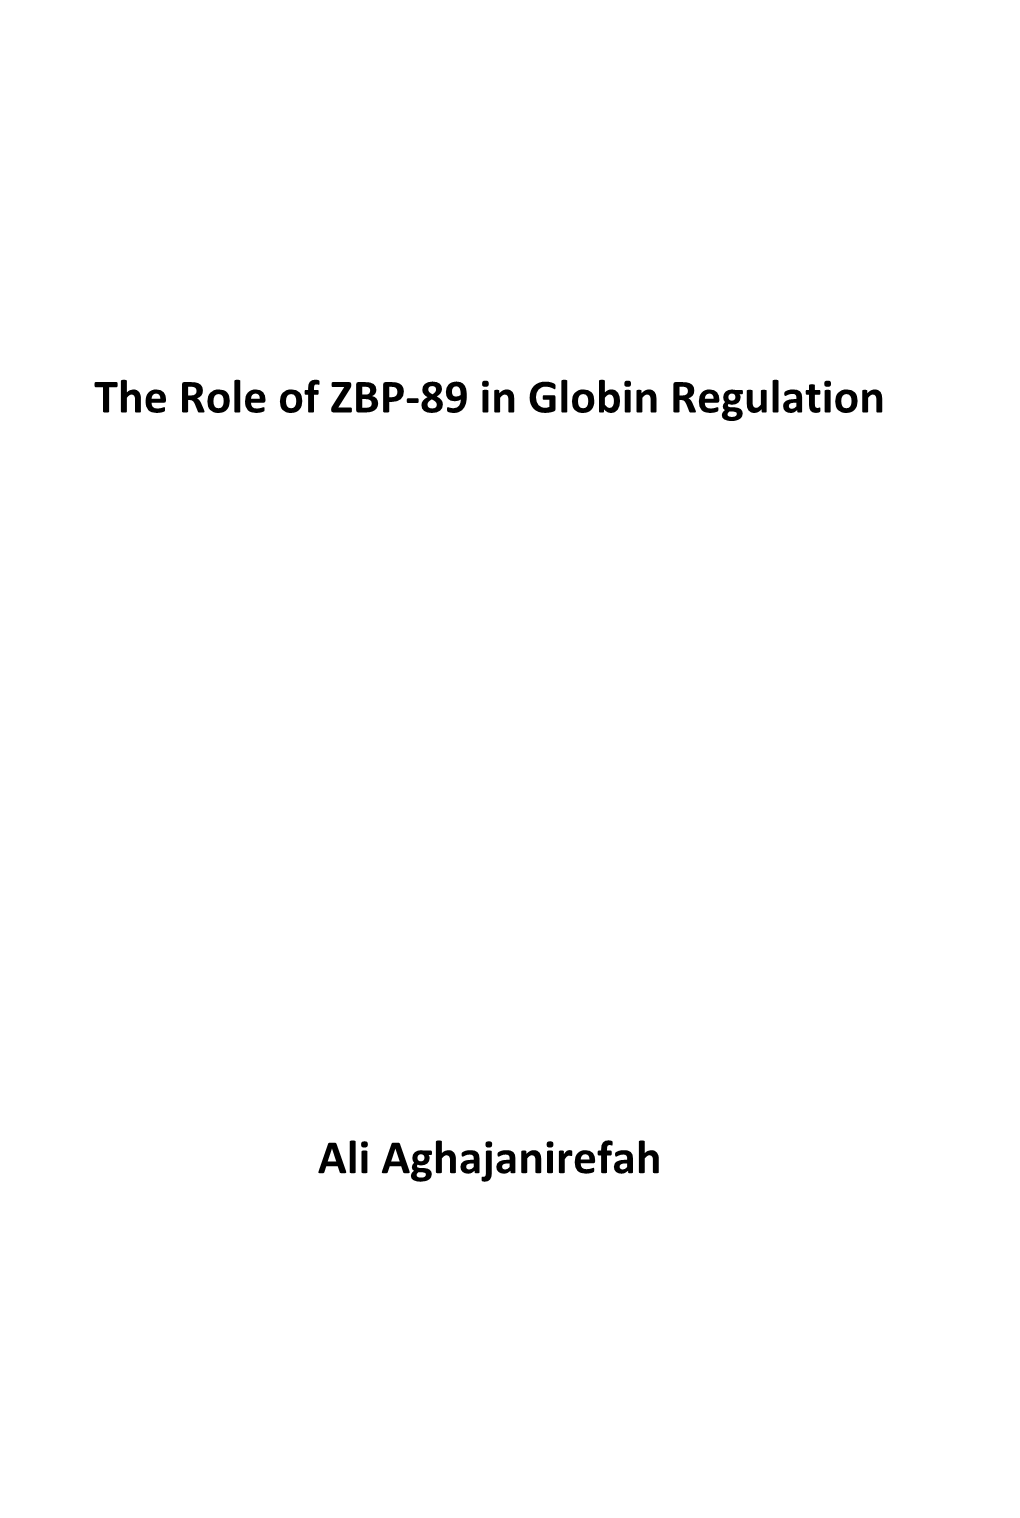 The Role of ZBP-89 in Globin Regulation